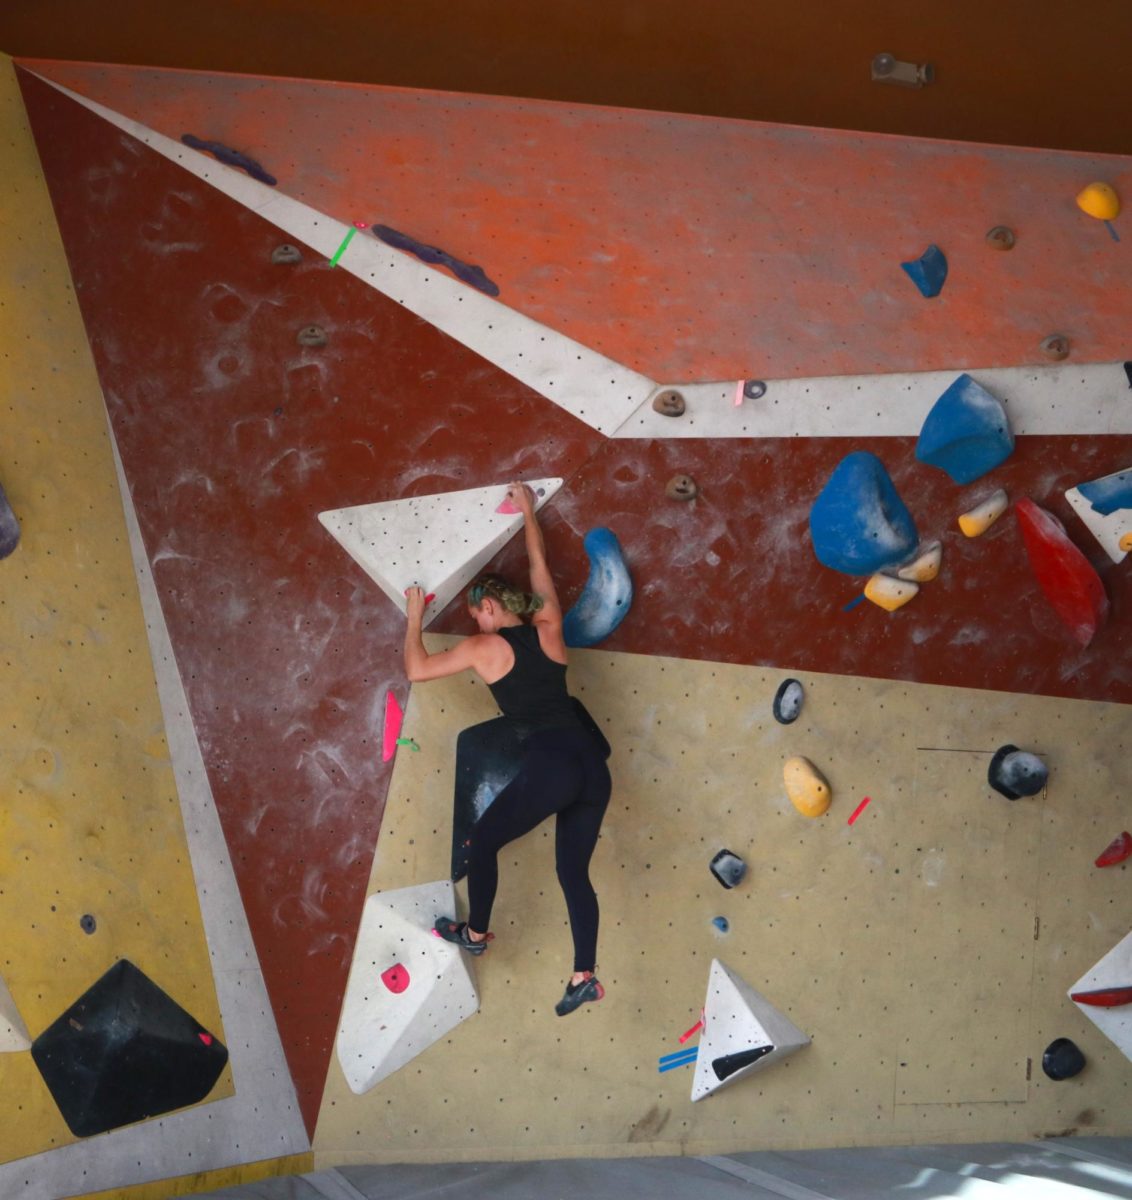 Lauren+Nickel%2C+junior%2C+climbs+the+rock+wall+at+Upper+Limits+on+Sunday%2C+Sept.+17.+Nickel+has+been+a+member+of+the+MHS+rock+climbing+club+that+meets+at+Upper+Limits.